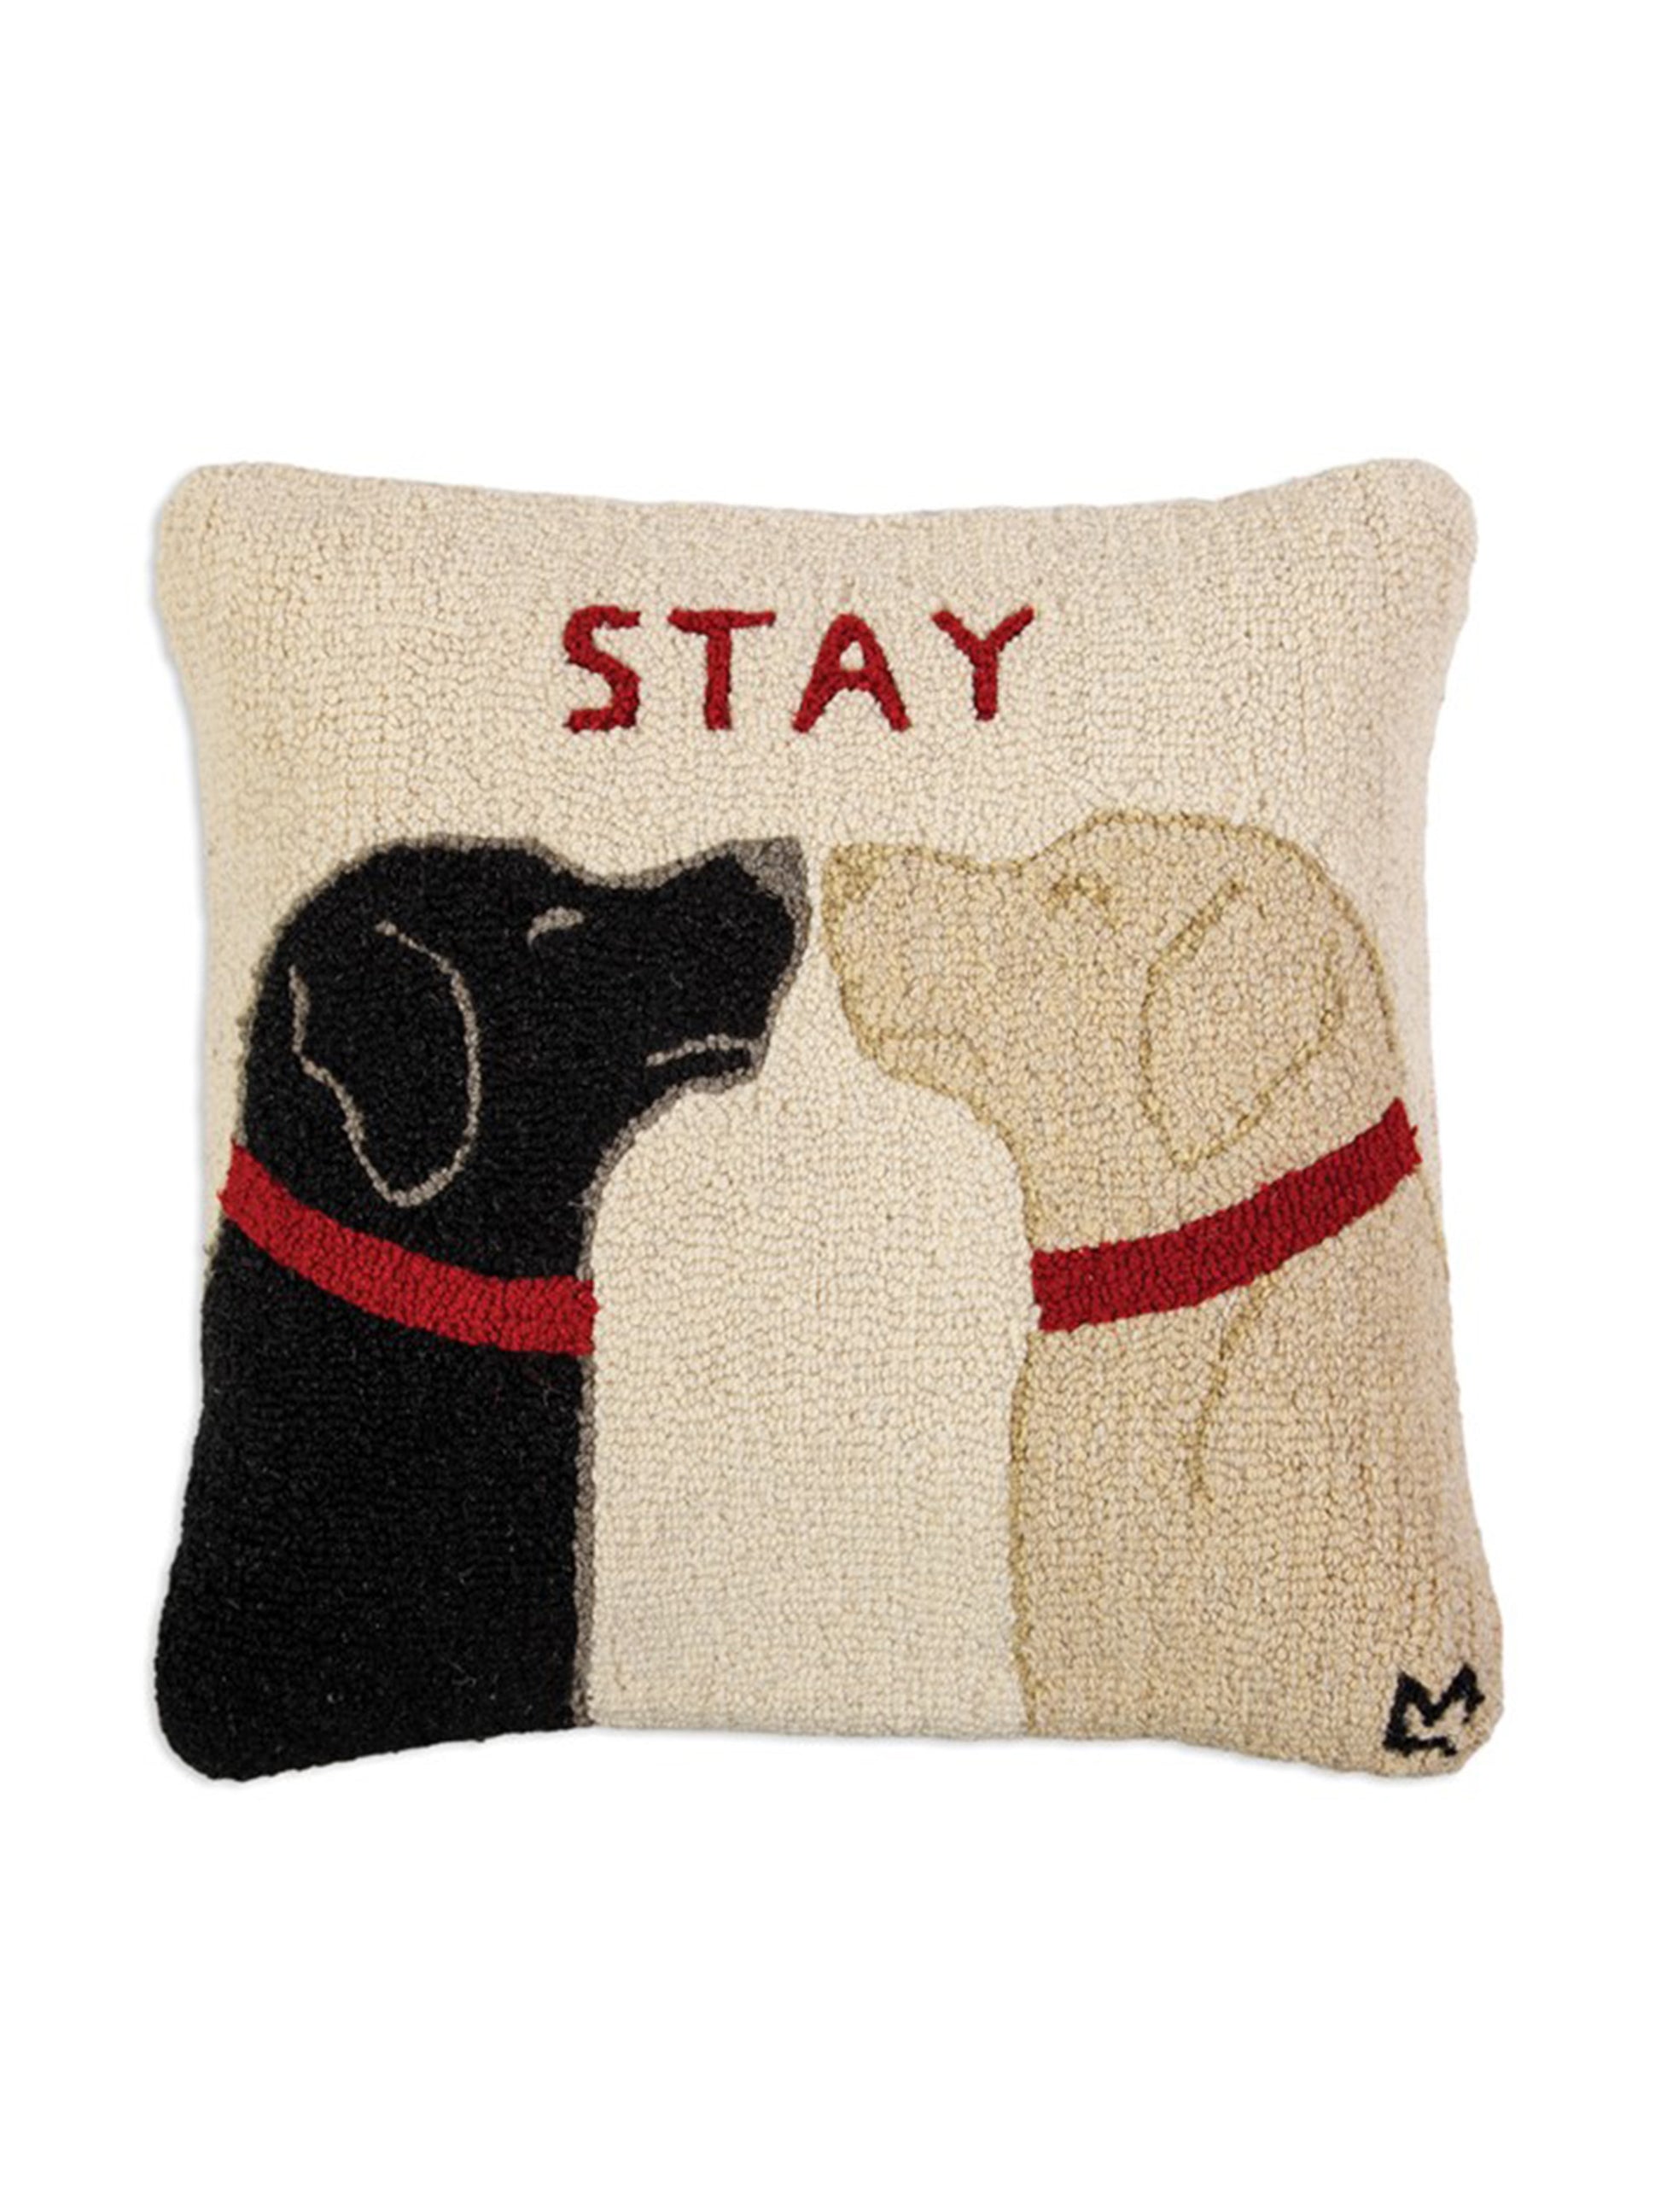 Stay Hooked Wool Pillow Weston Table